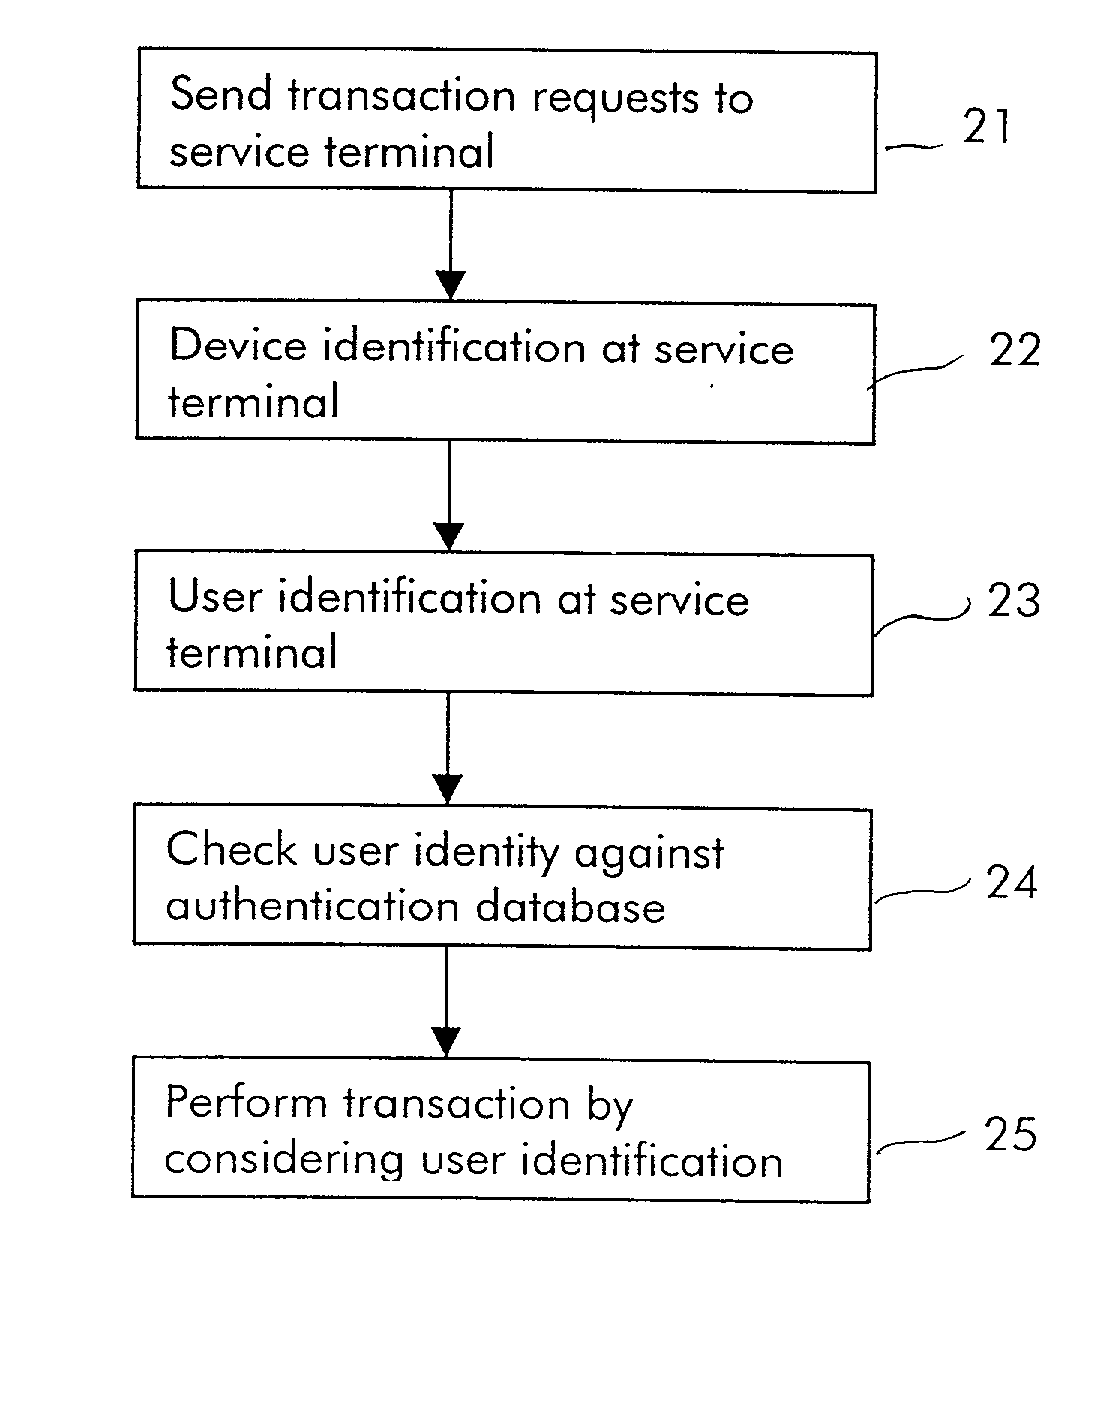 Method for performing short-range wireless transactions between an hybrid wireless terminal and a service terminal over an interface for short-range wireless access and corresponding service terminal